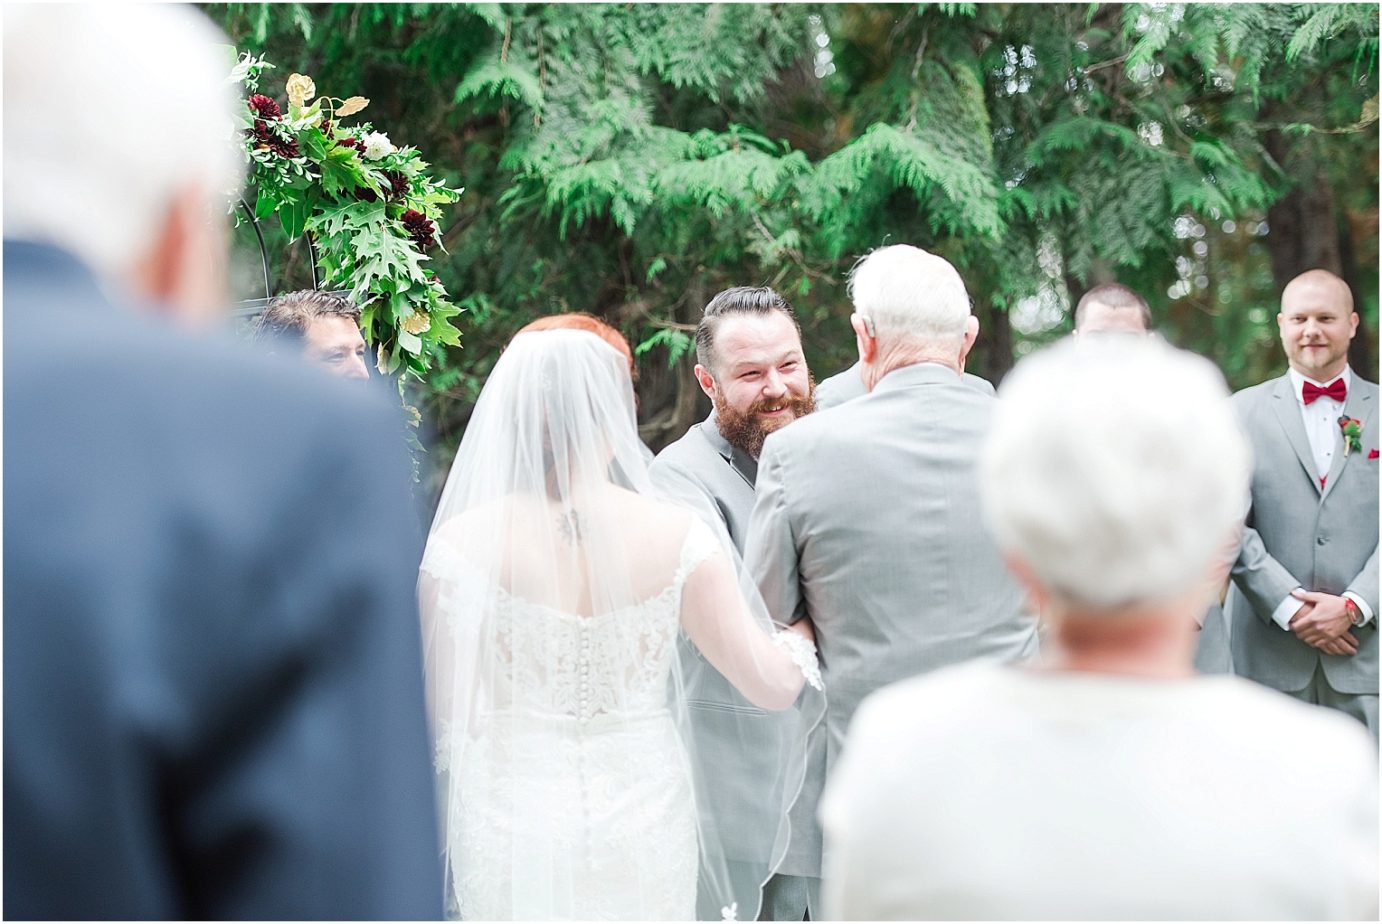 Ohme Garden Wedding Wenatchee Photographer Billy and Mali grooms first look during ceremony